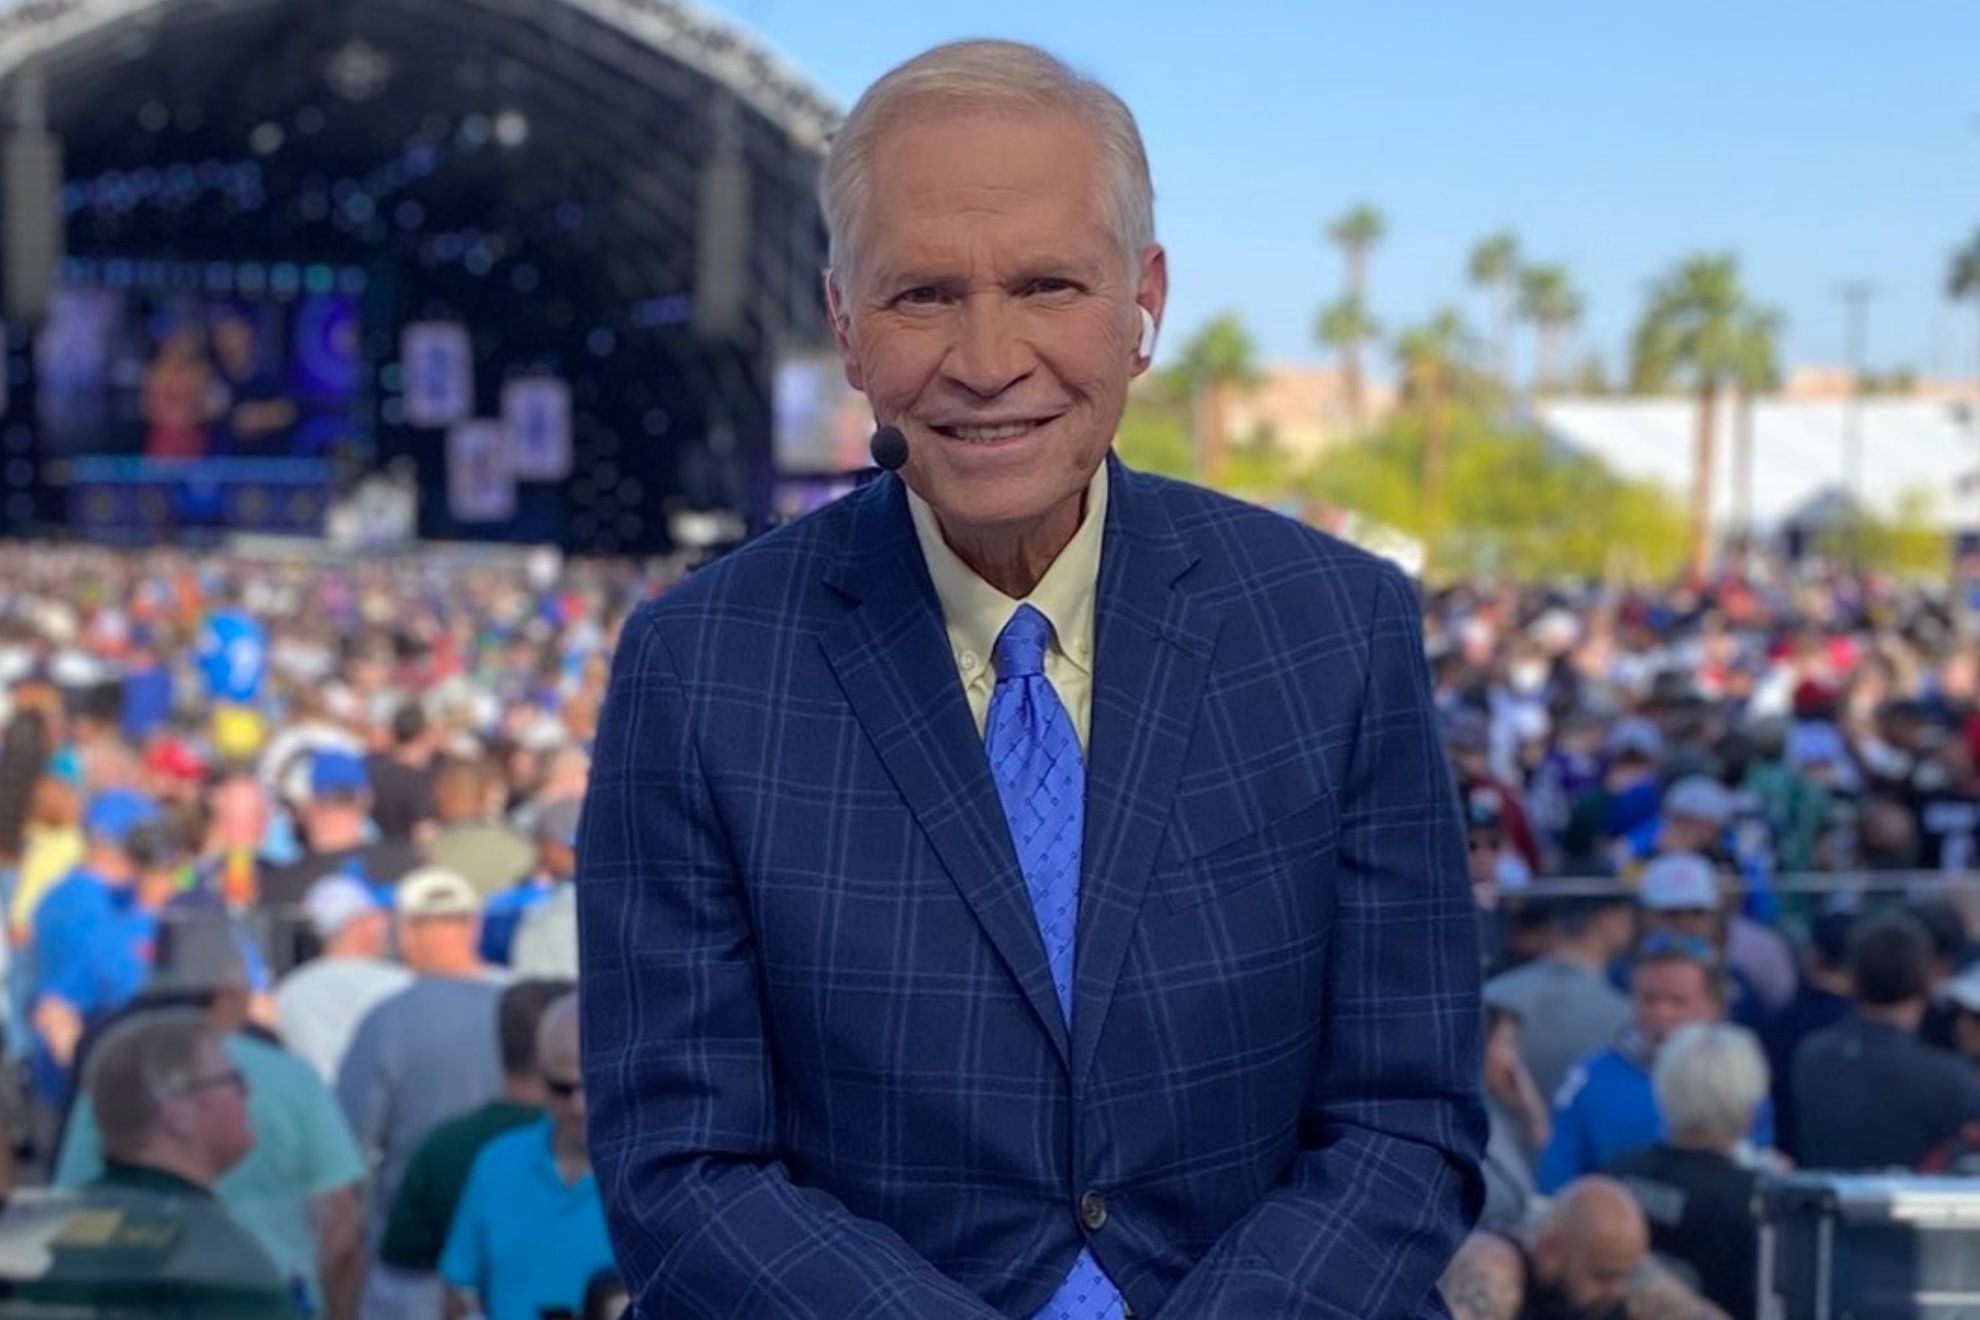 Chris Mortensen was a long-time reporter and NFL insider for ESPN